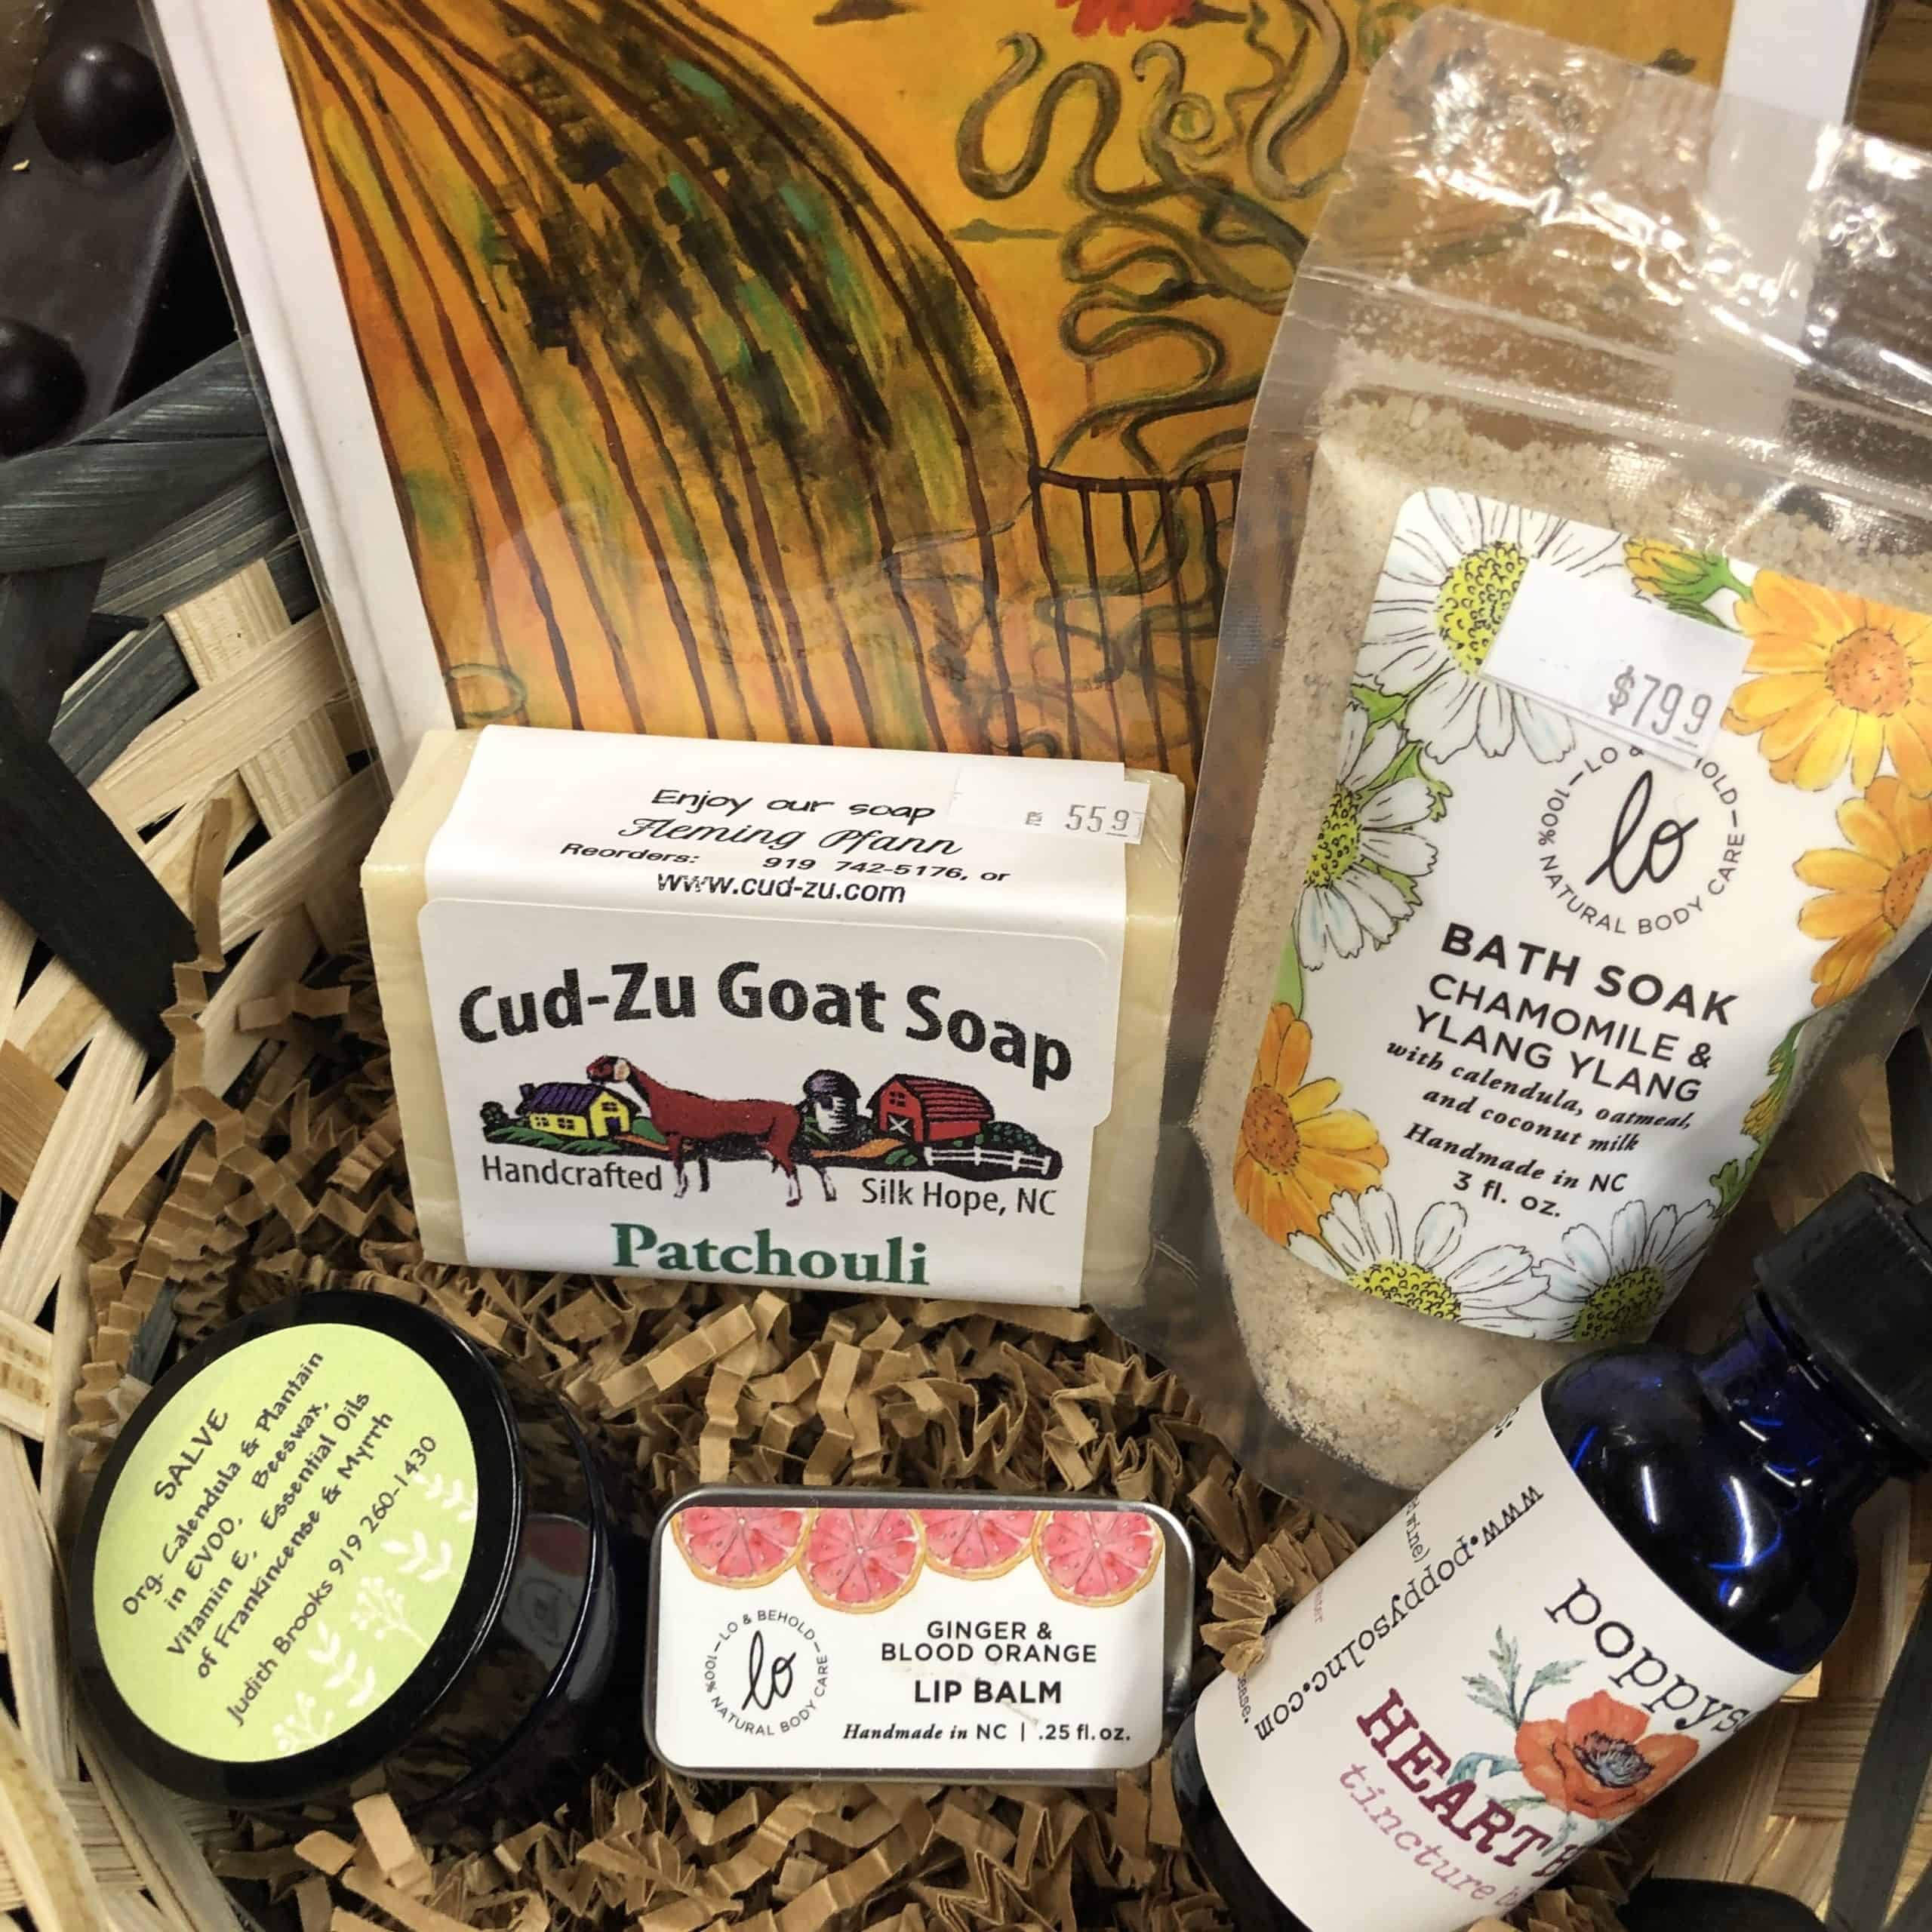 Locally made self care health & beauty at the Saxapahaw General Store